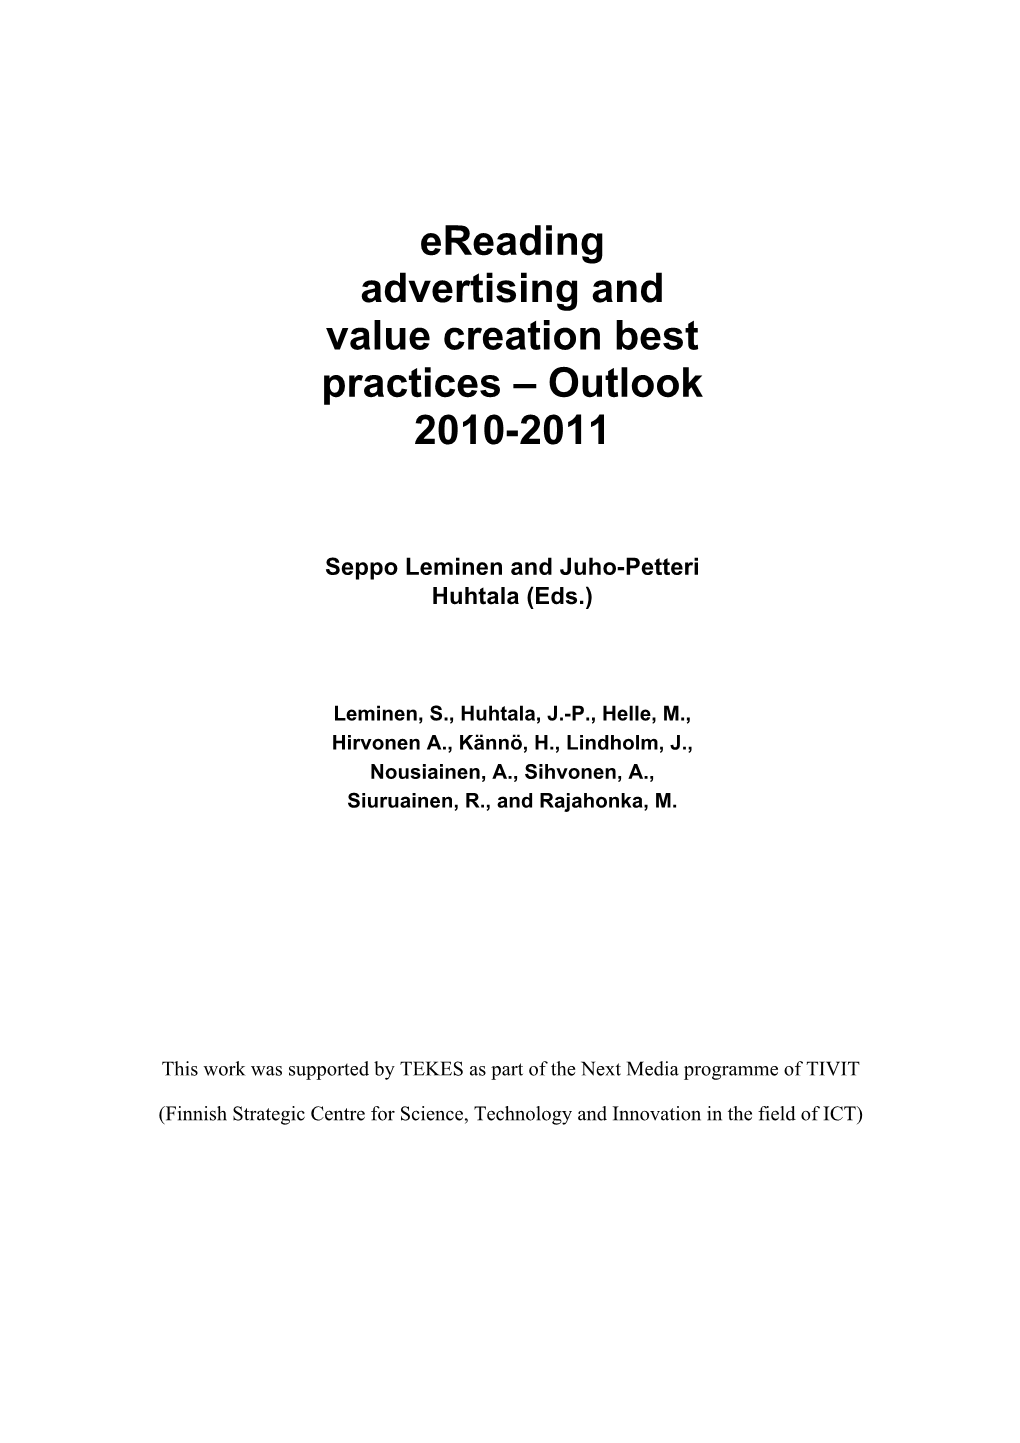 Ereading Advertising and Value Creation Best Practices – Outlook 2010-2011